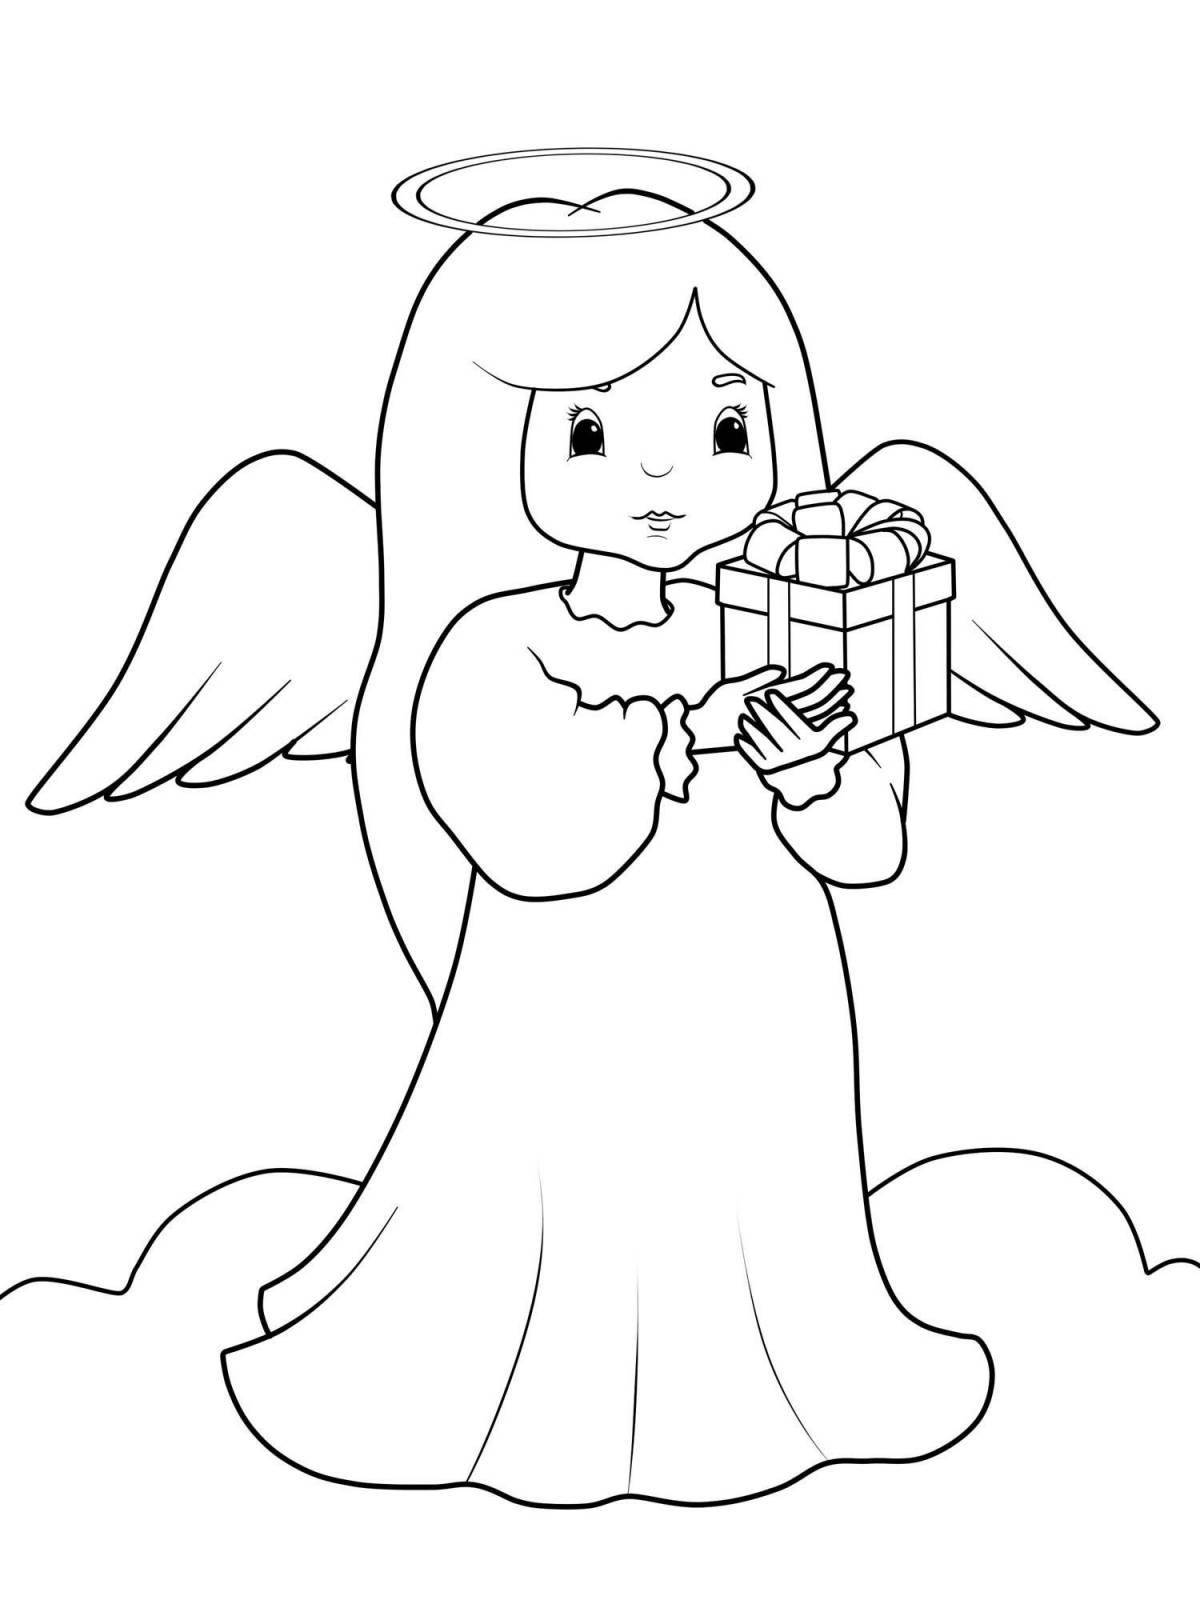 Exalted angel coloring book for kids